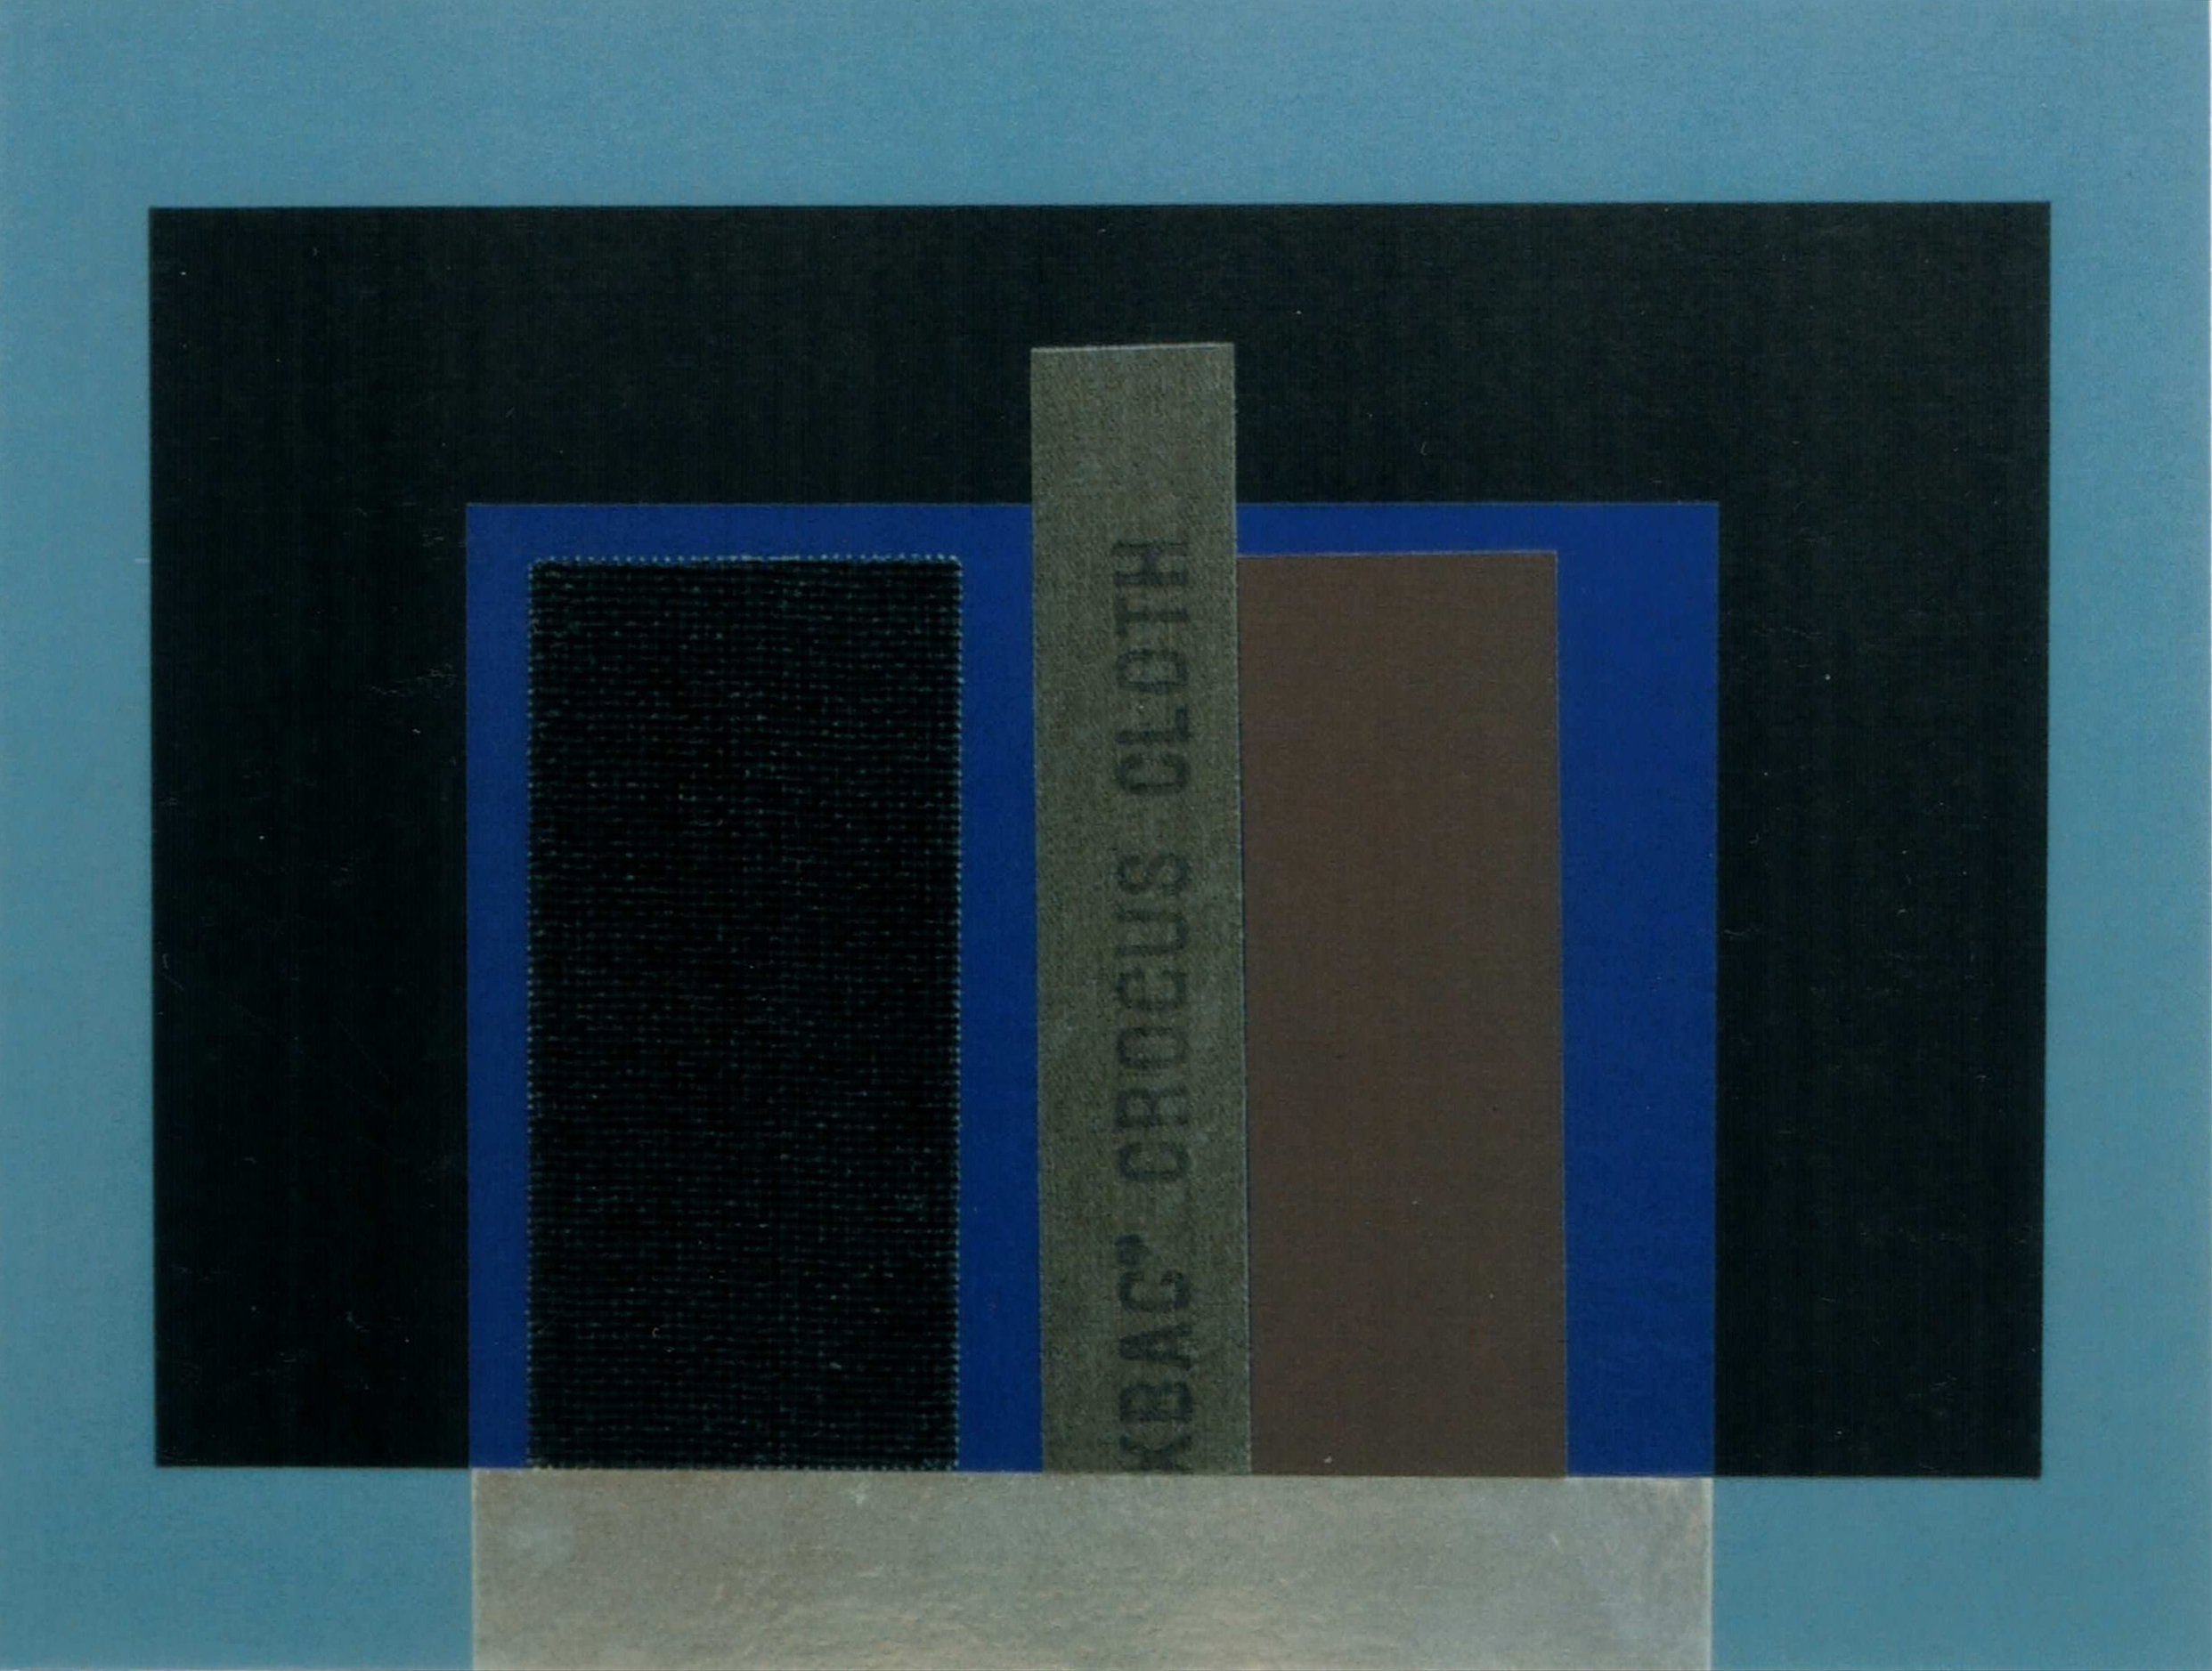 New York Studio, 1989, Collage with Sand Paper, 15x17 inches, Private Collection